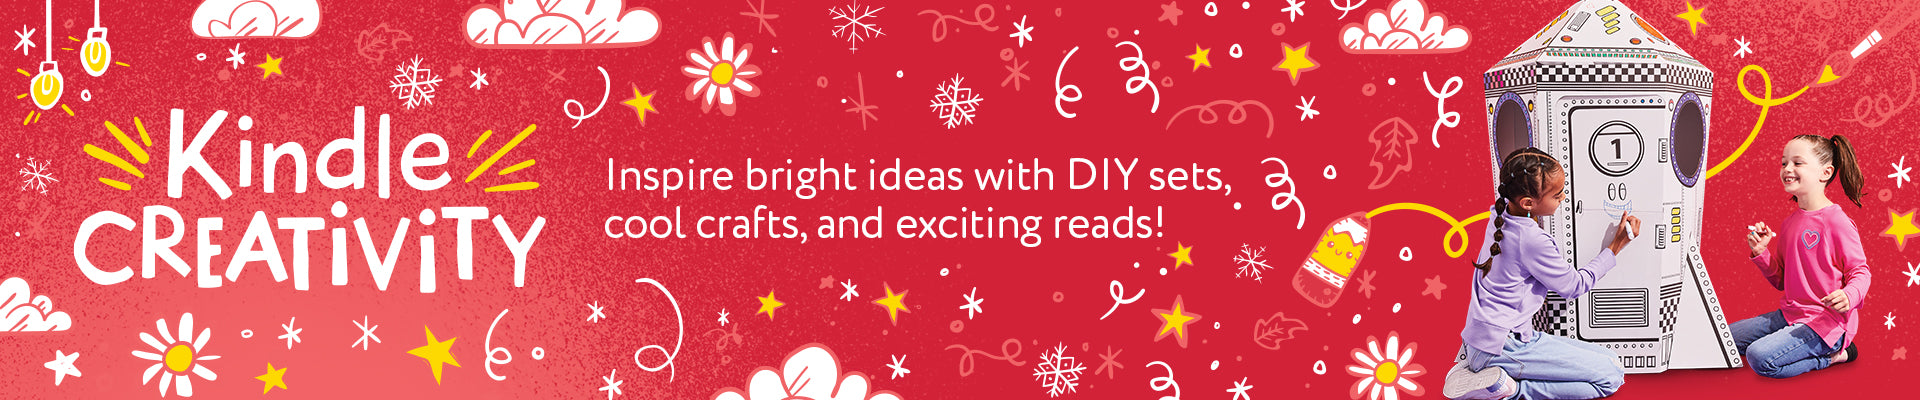 Mastermind Toys - Kindle Creativity - Inspire bright ideas with DIY sets, cool crafts, and exciting reads!